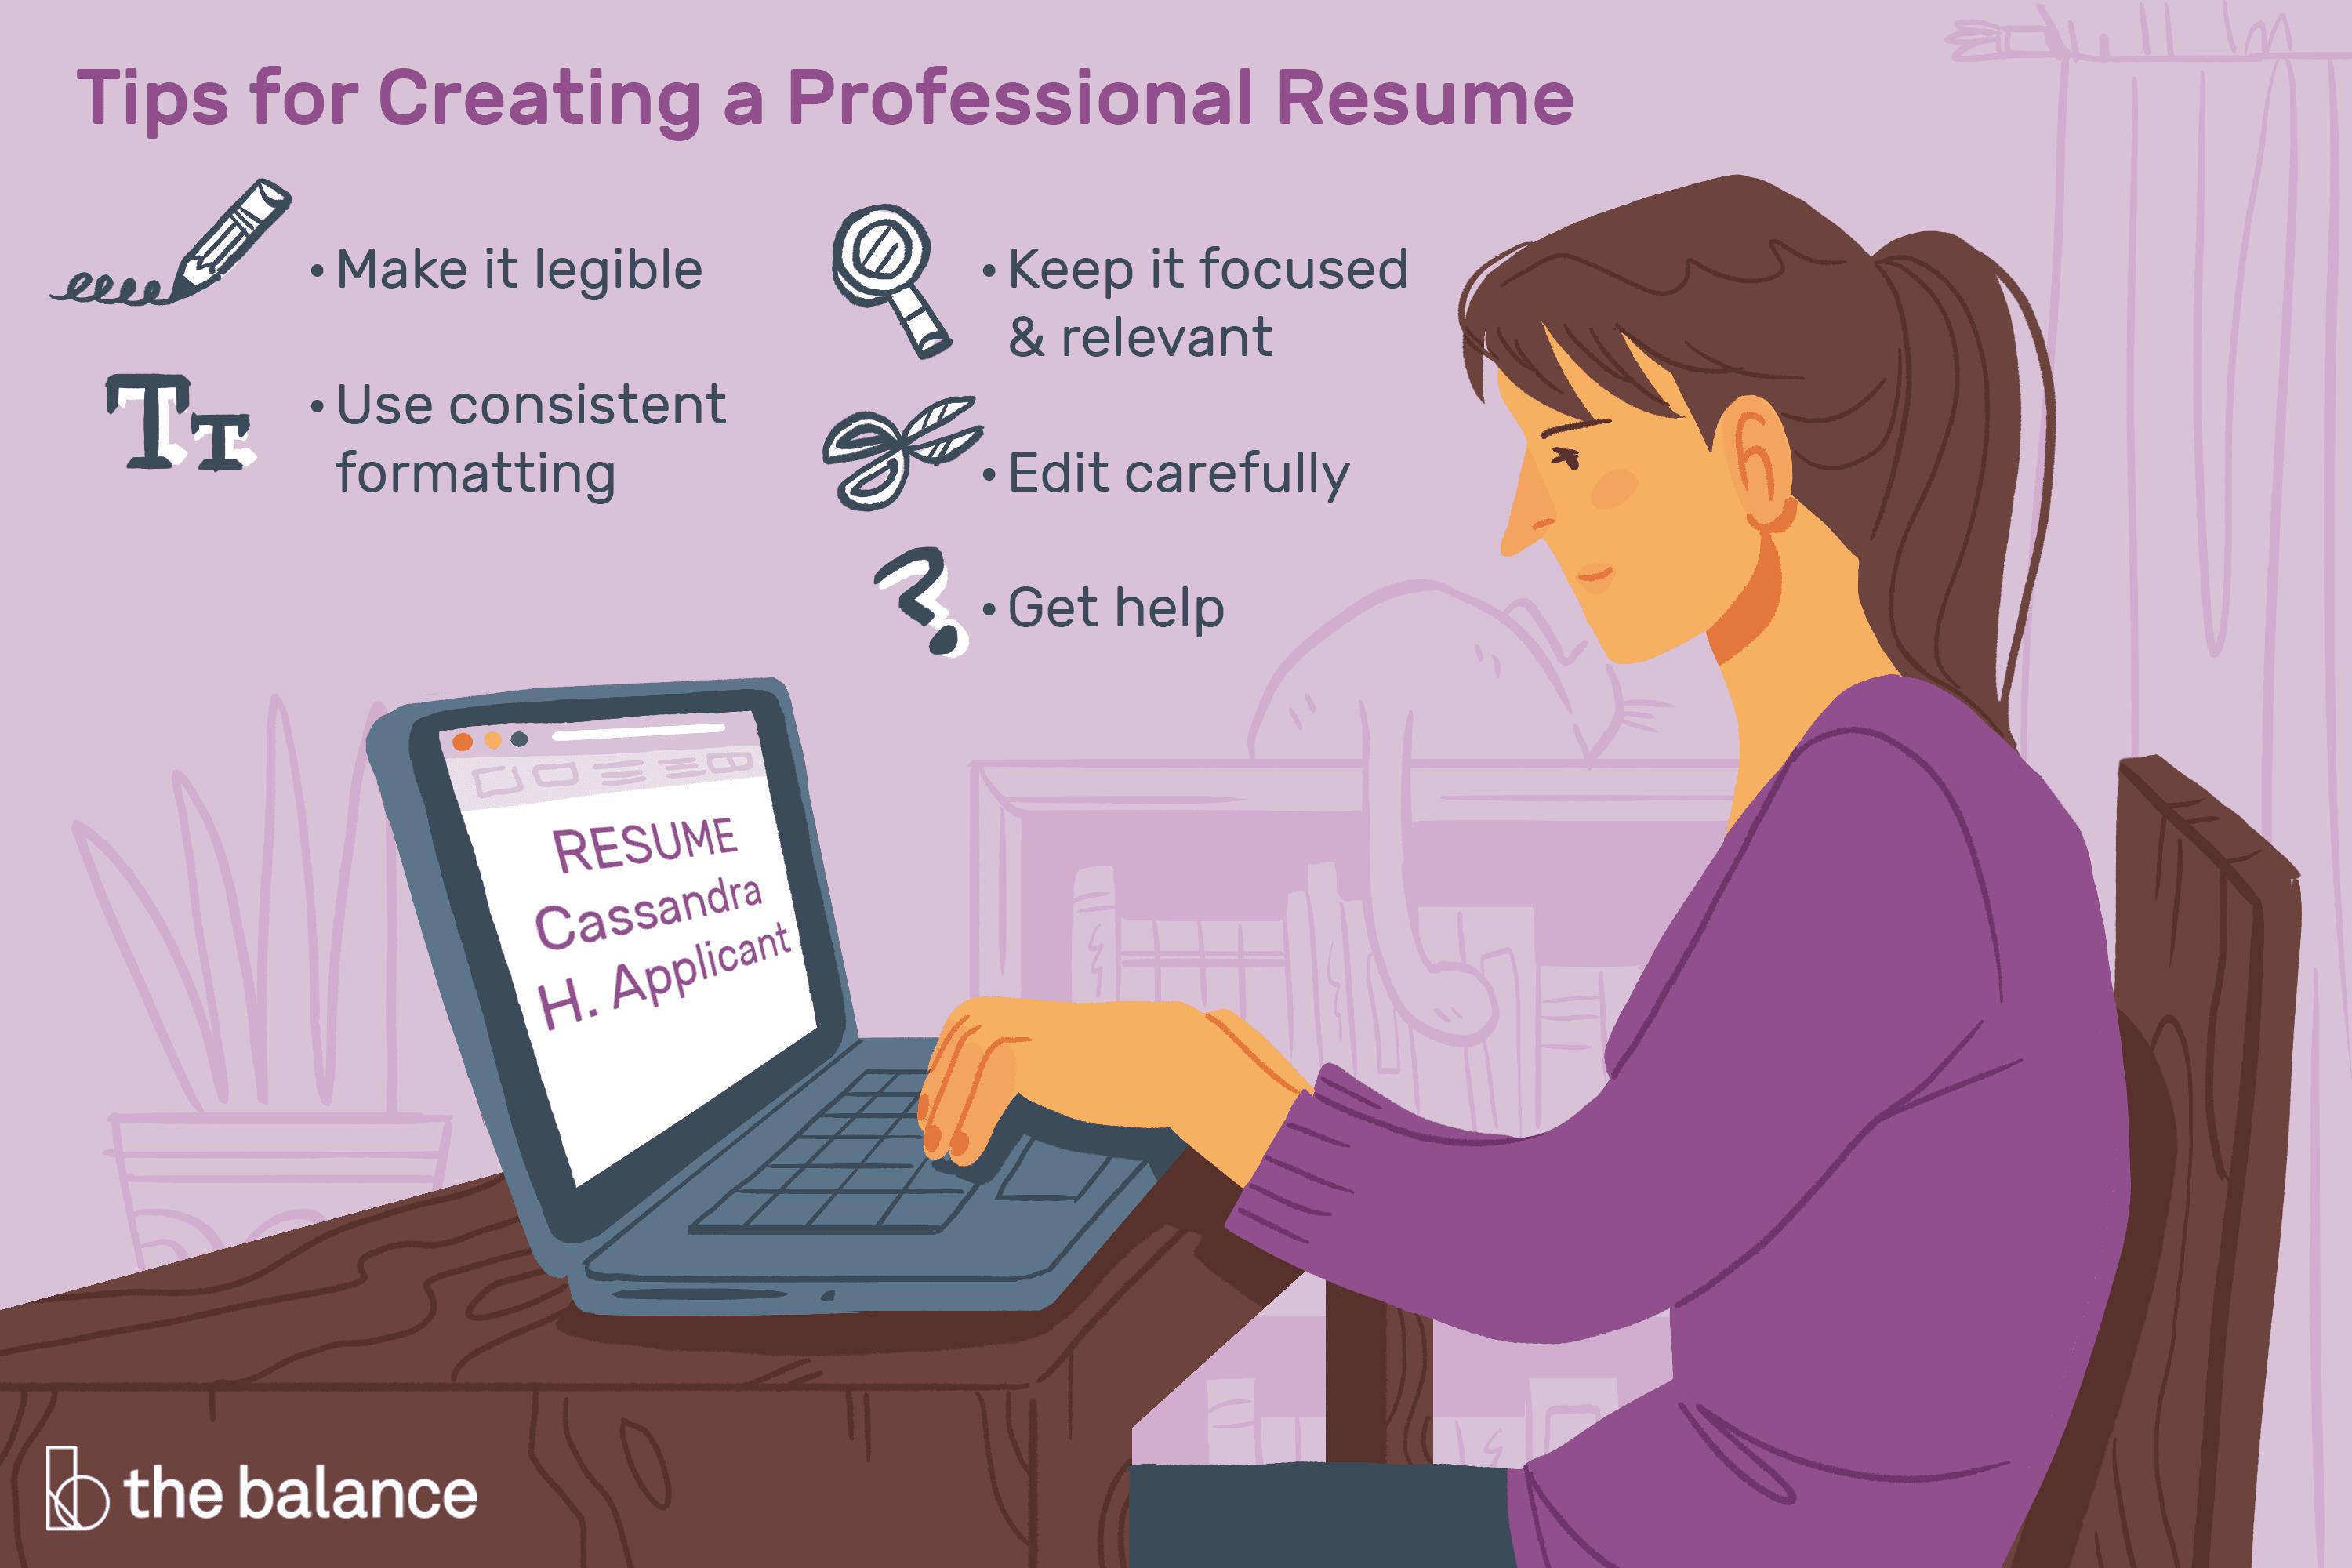 Tips for Creating a Professional Resume